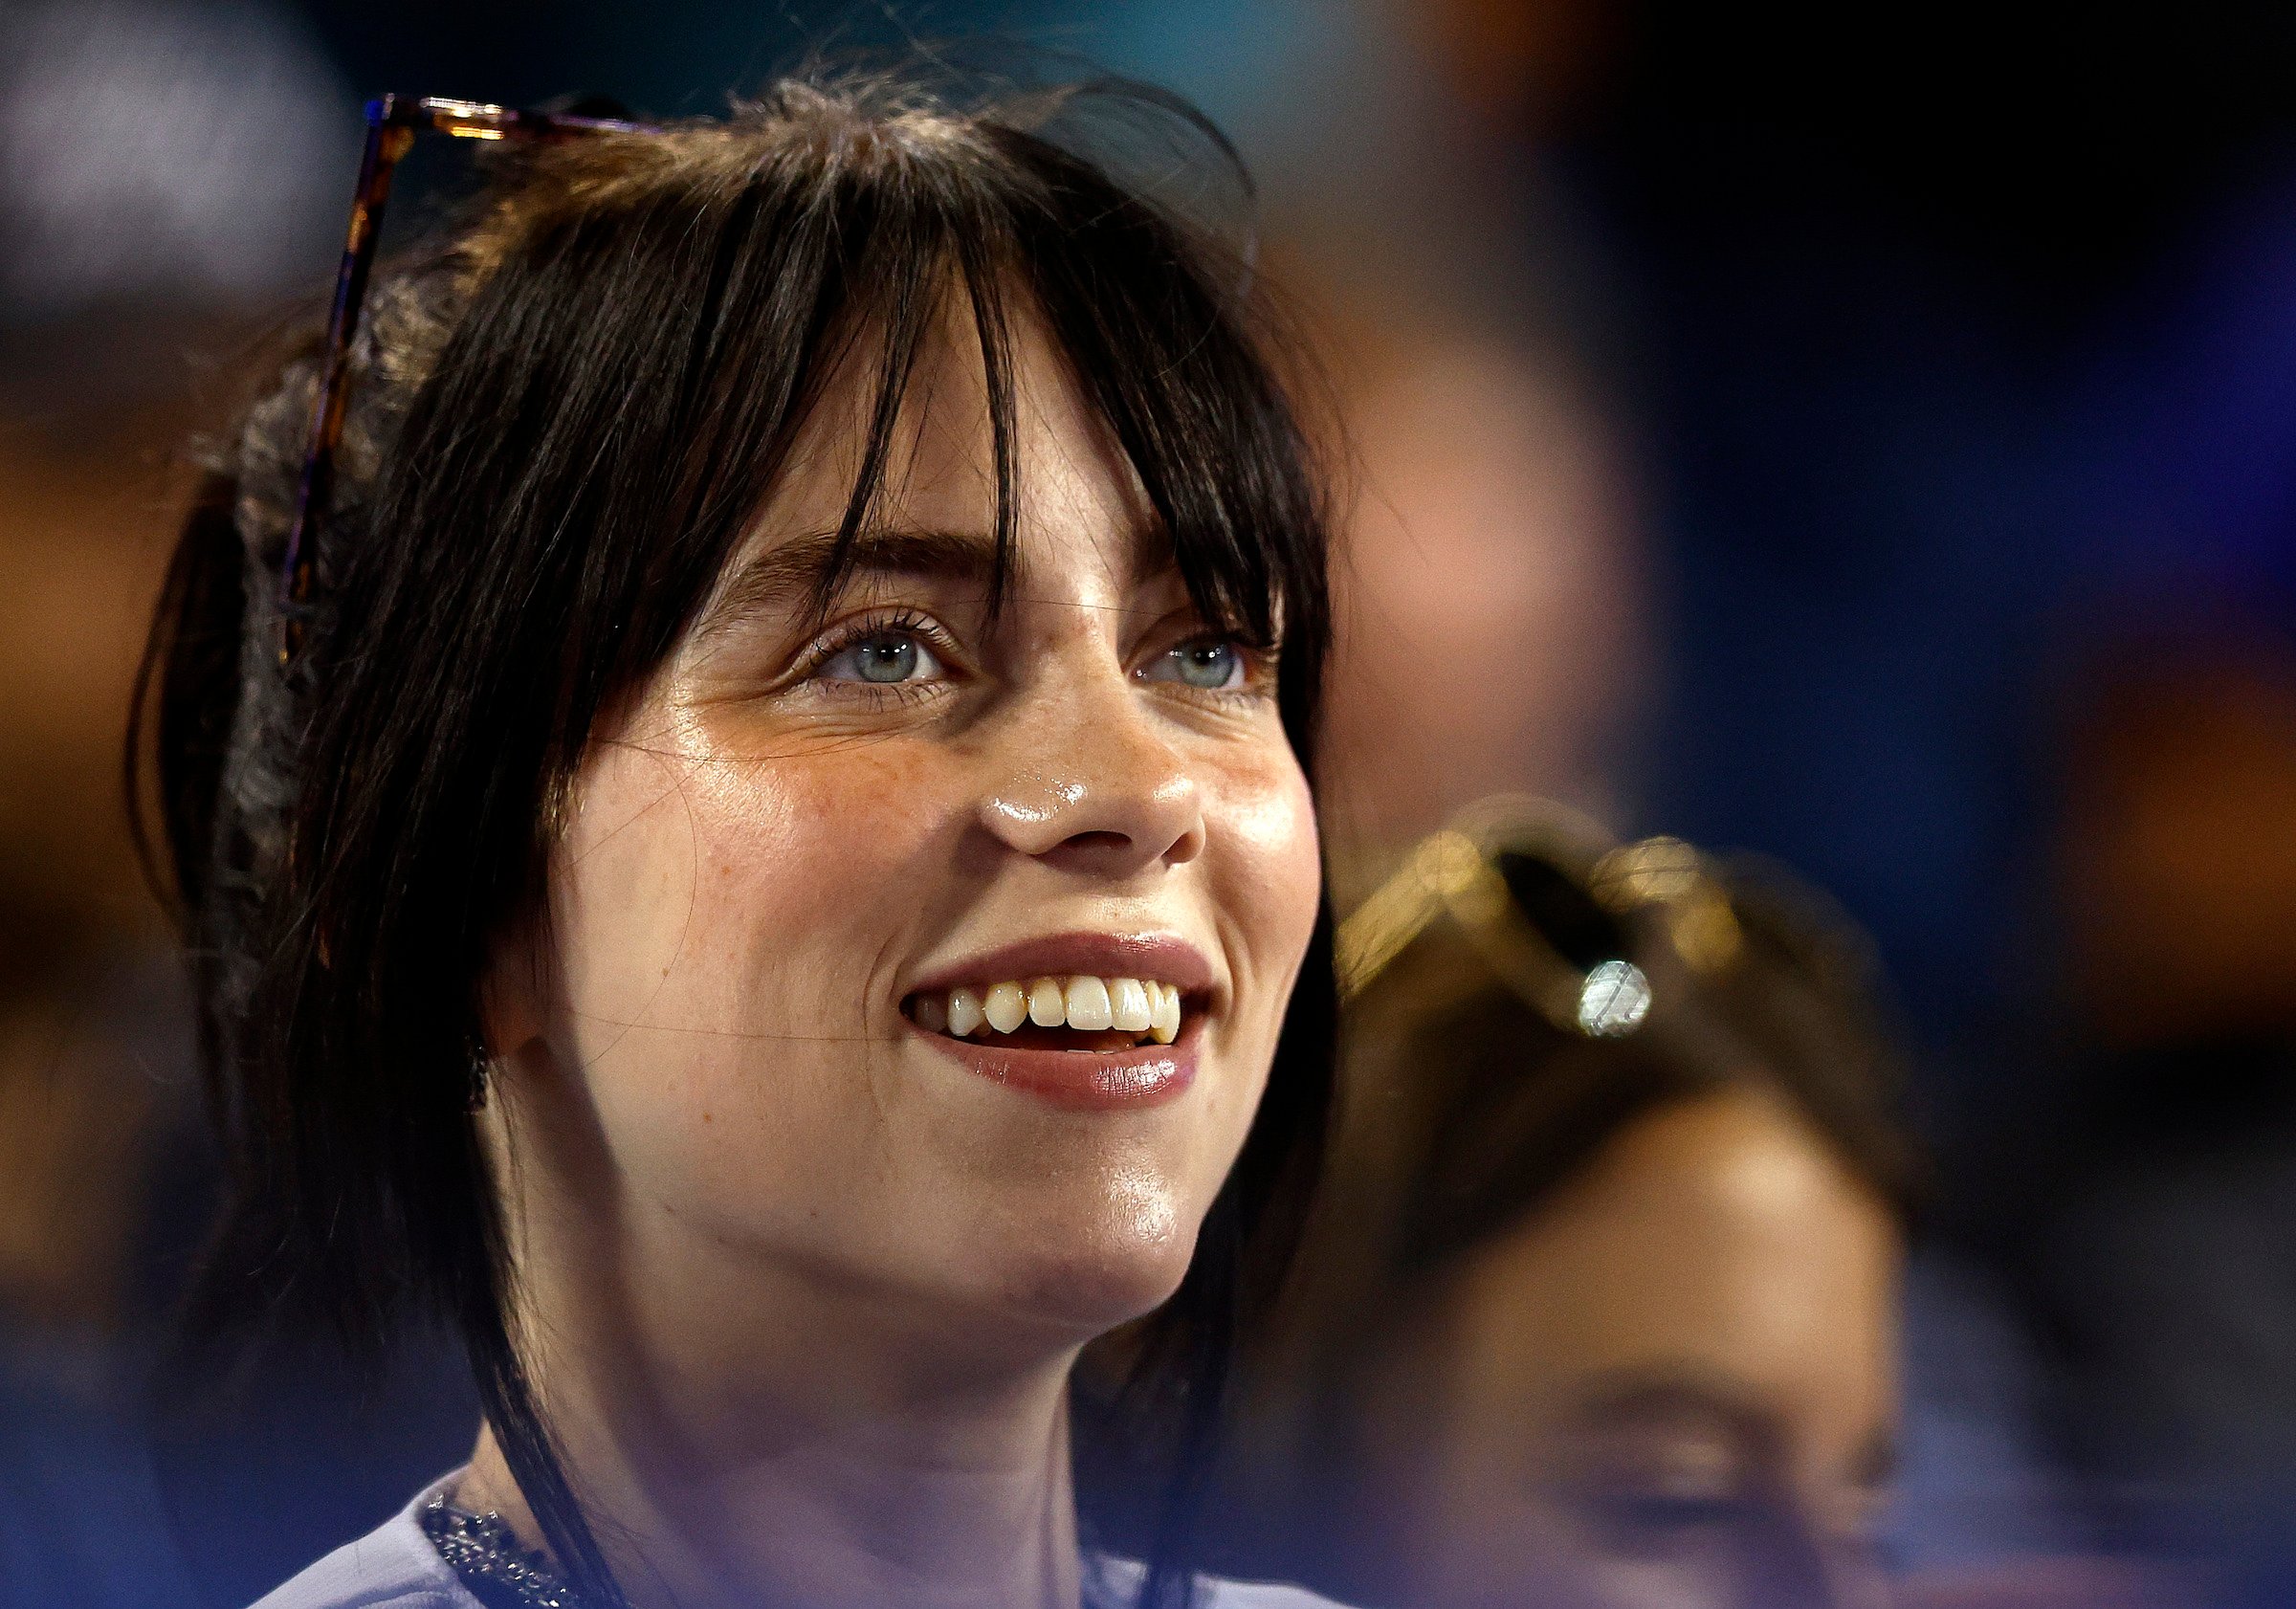 Billie Eilish, who had a fear of going outside, smiling at a baseball game.